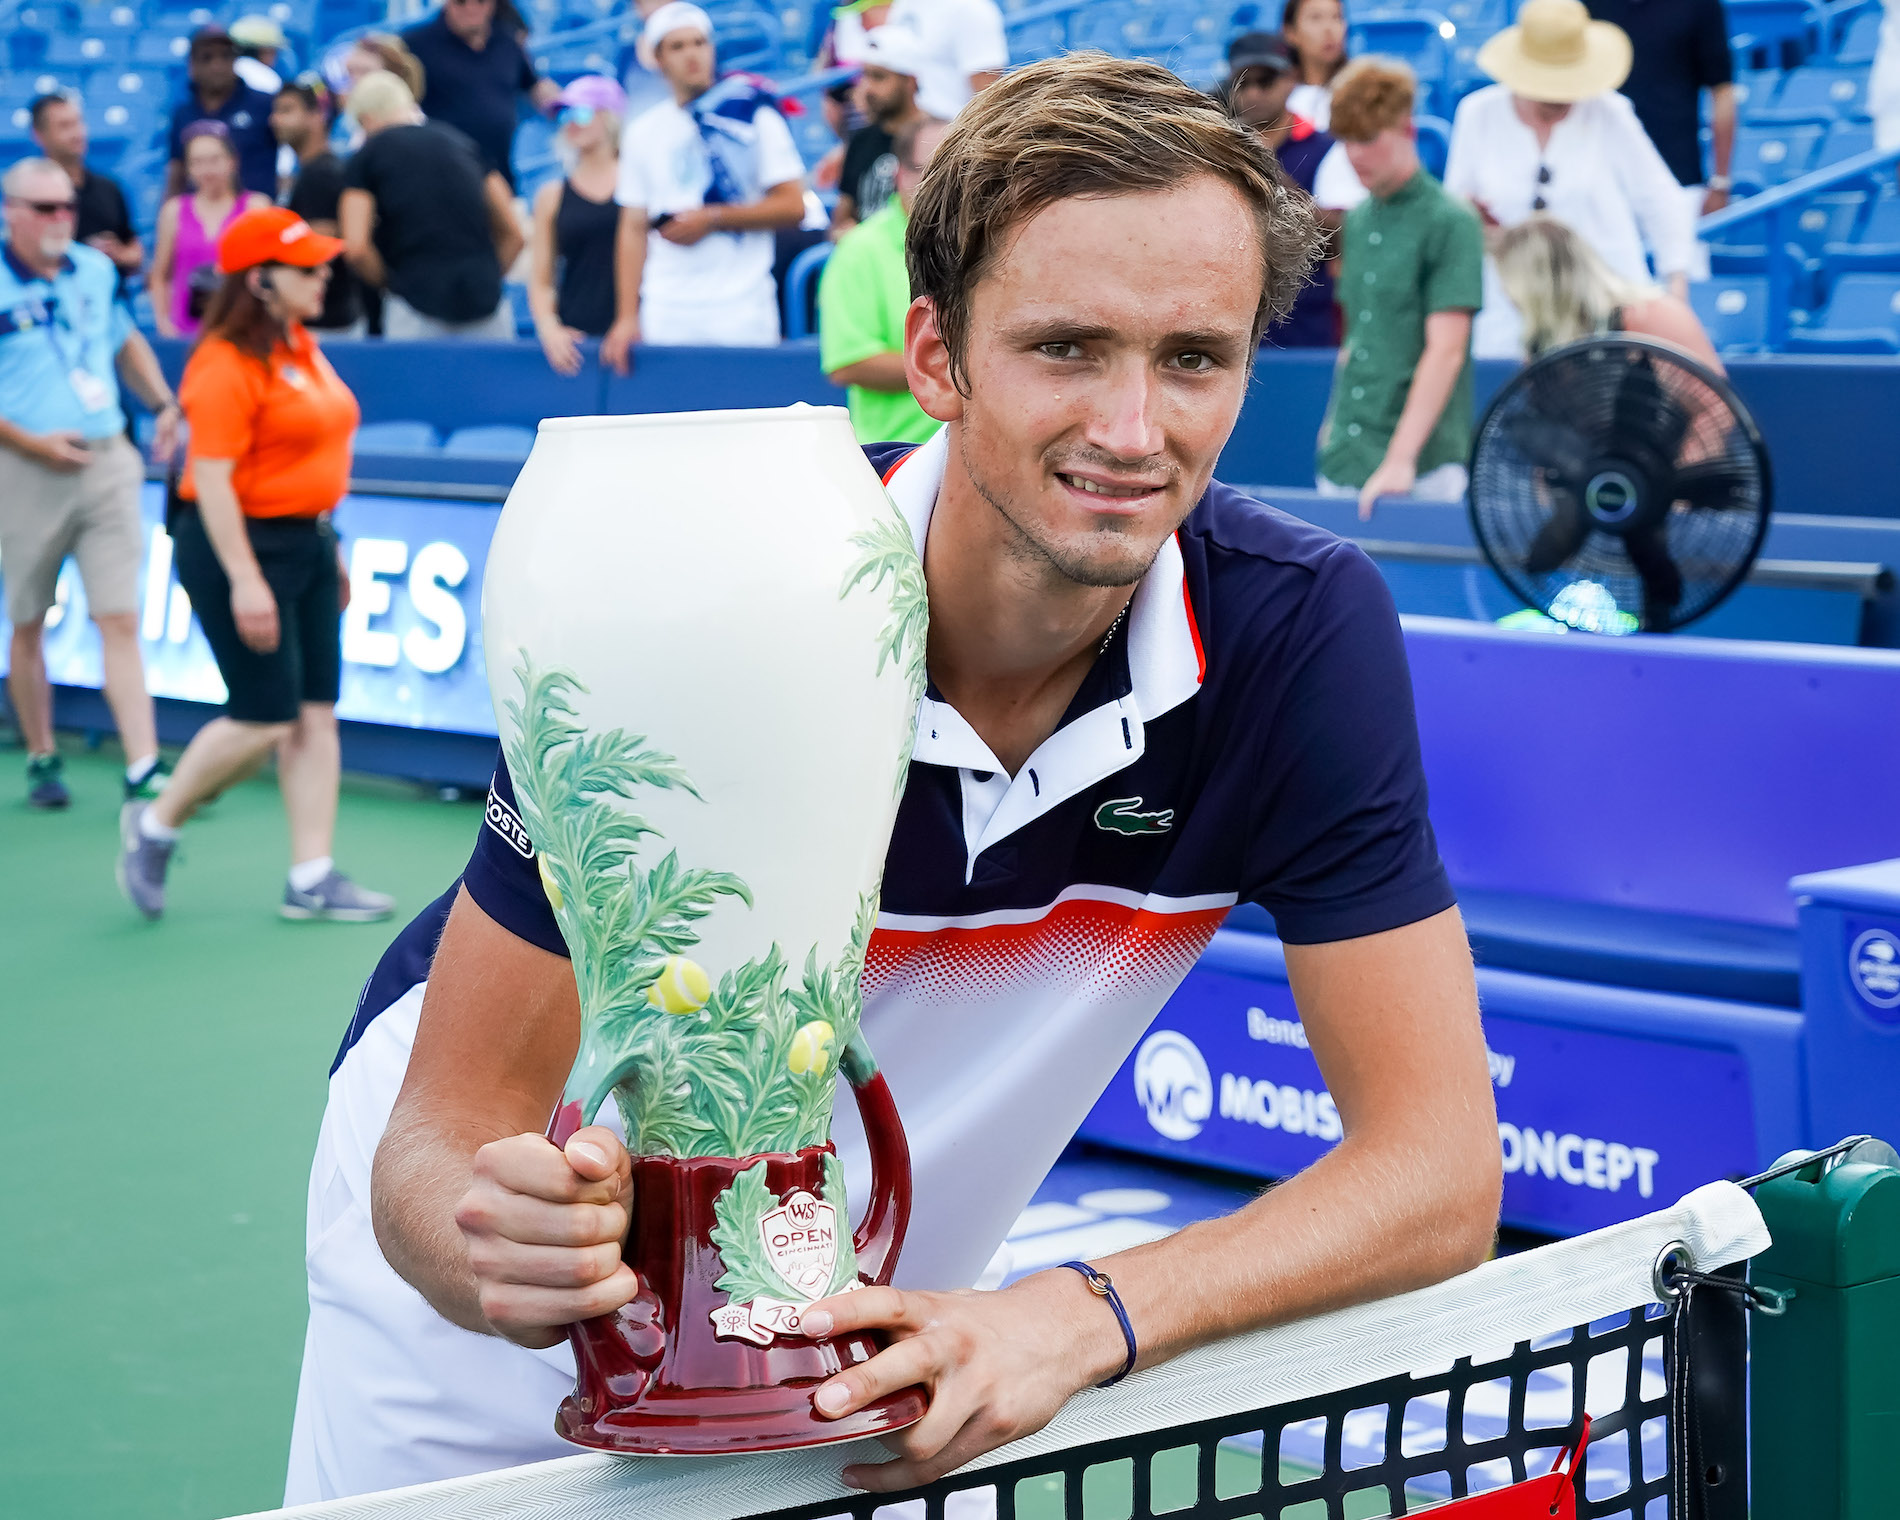 man posing with trophy